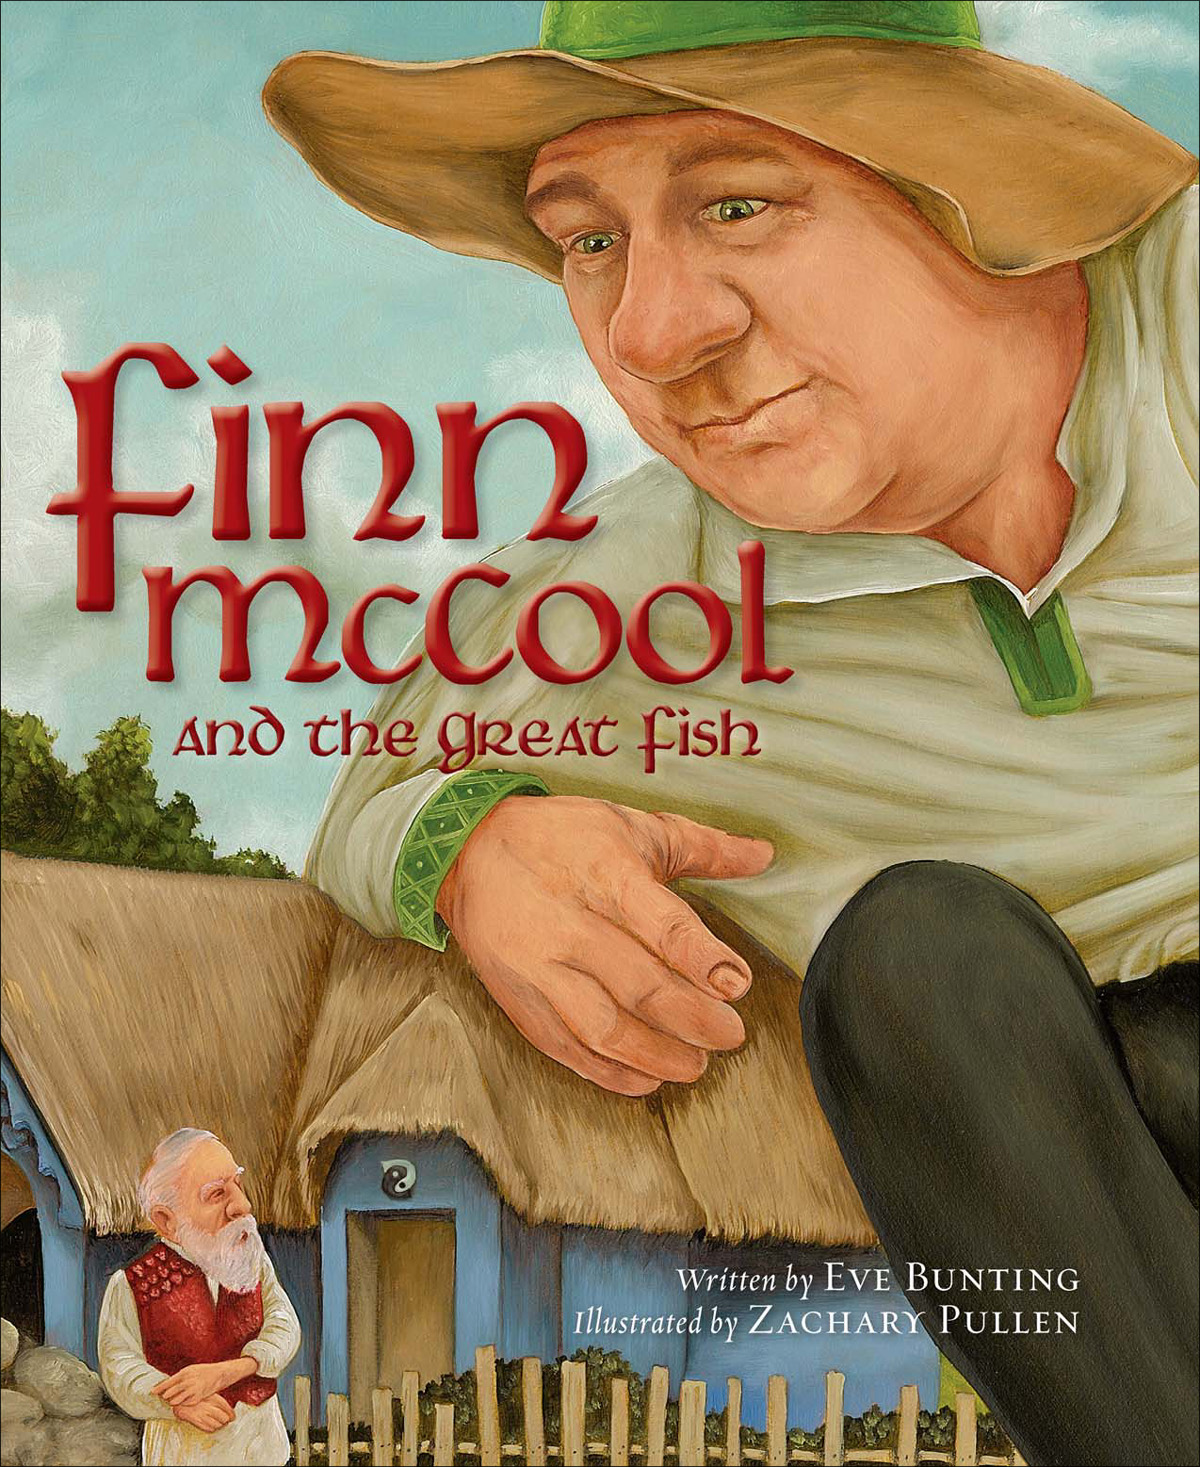 Finn McCool and the Great Fish (2010)